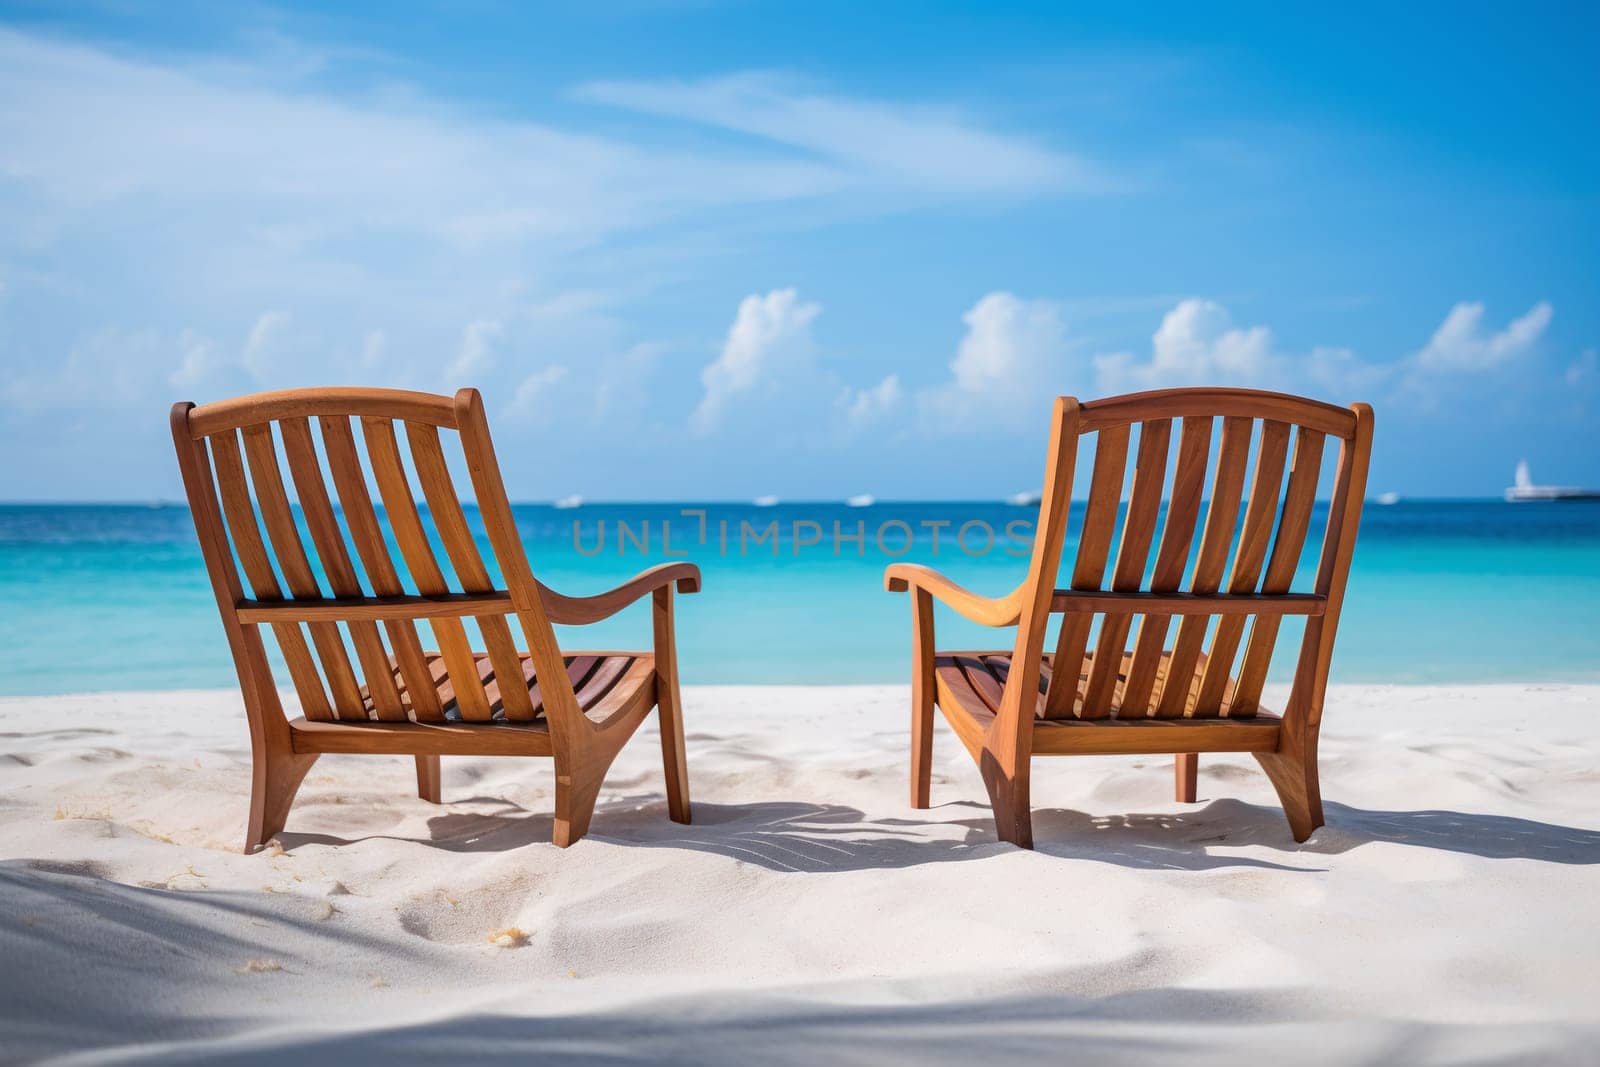 Two Wooden Chairs on a Serene Beach With Crystal Blue Waters by chrisroll